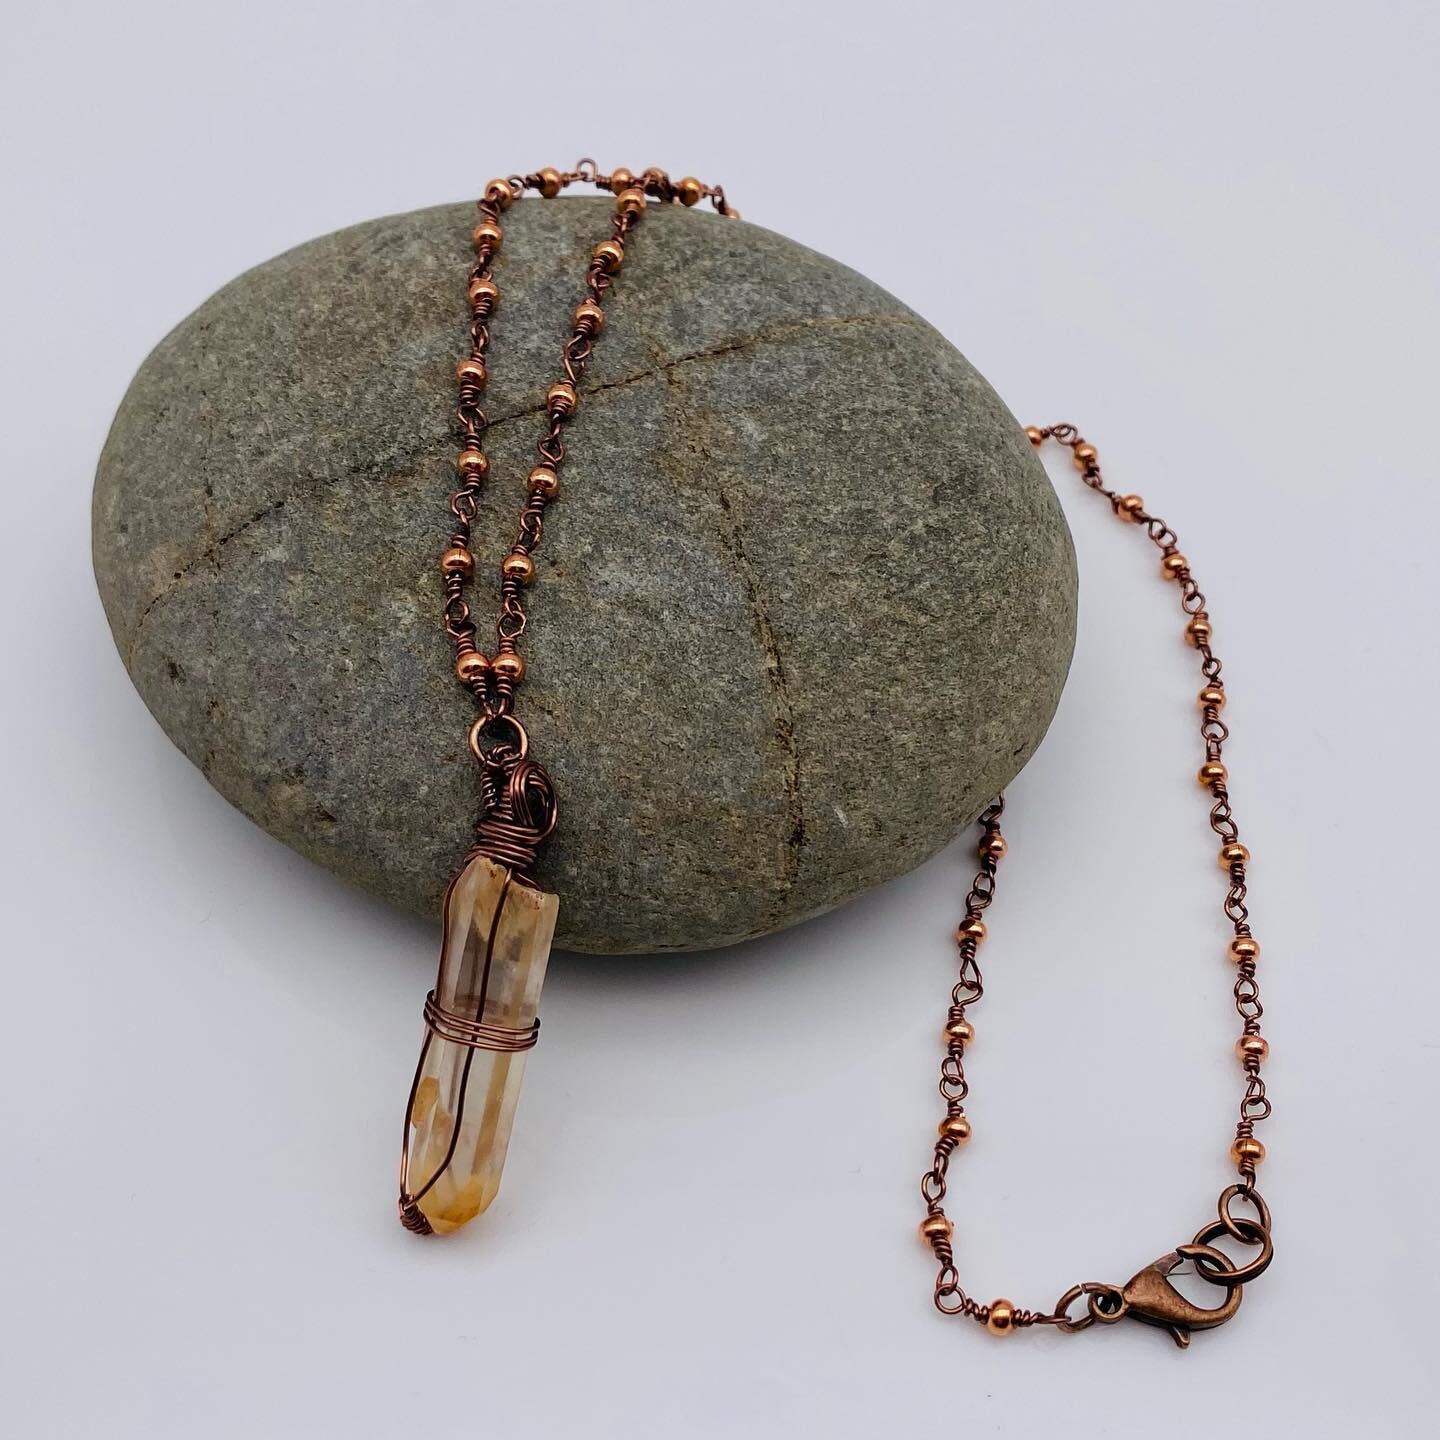 Known as a healing stone, phantom quartz is often used to help bring perspective into our lives and through Gaia&rsquo;s vibrations may allow us to connect more easily to the earth.

Made from antique copper, this wire wrapped necklace sports a majet